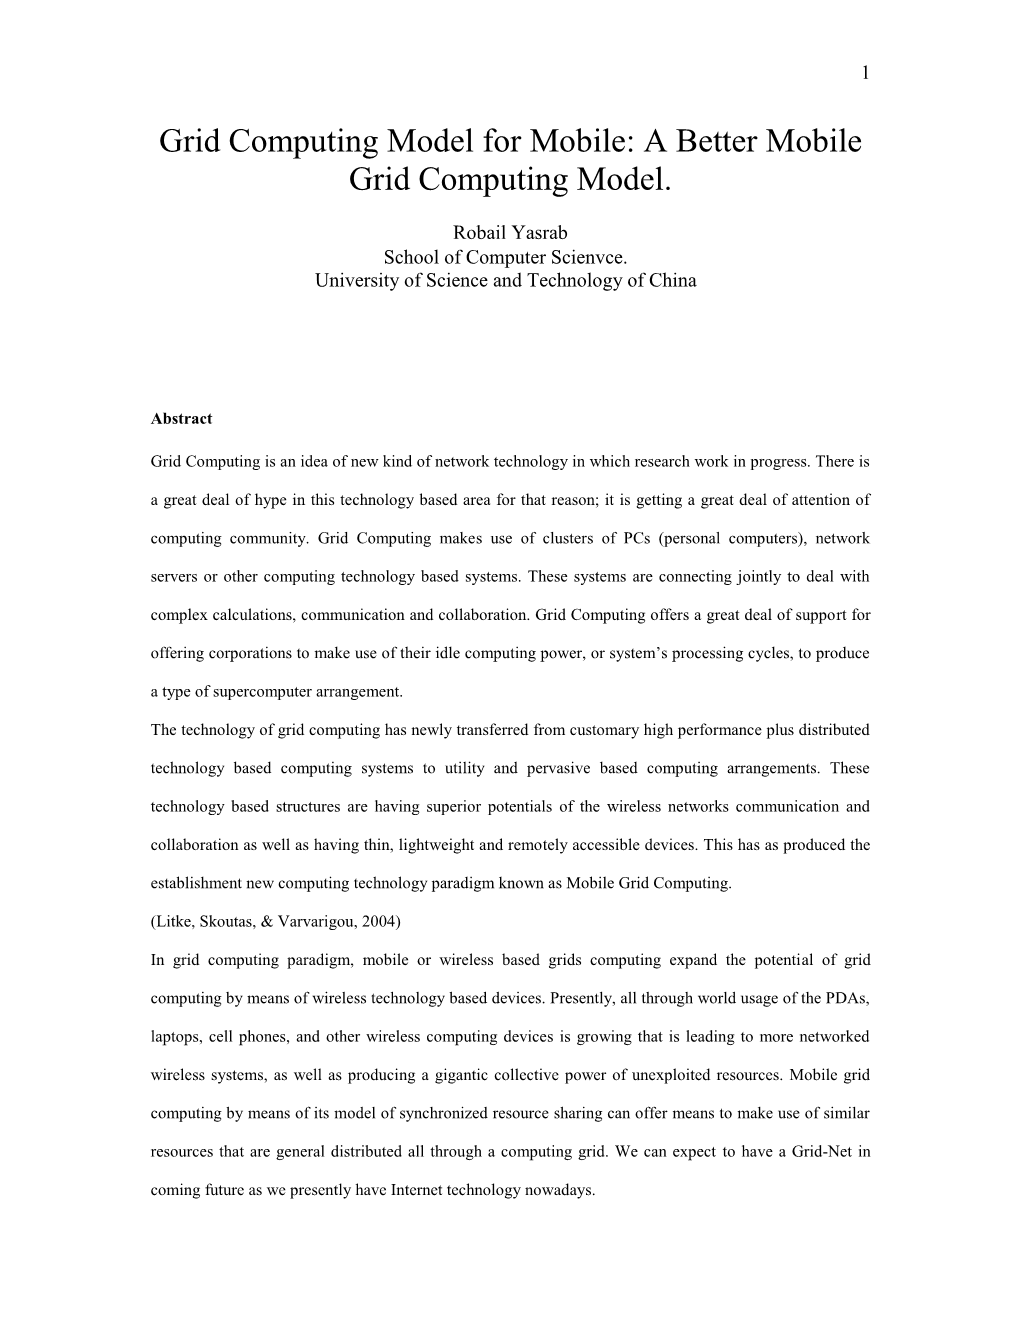 Grid Computing Model for Mobile: a Better Mobile Grid Computing Model